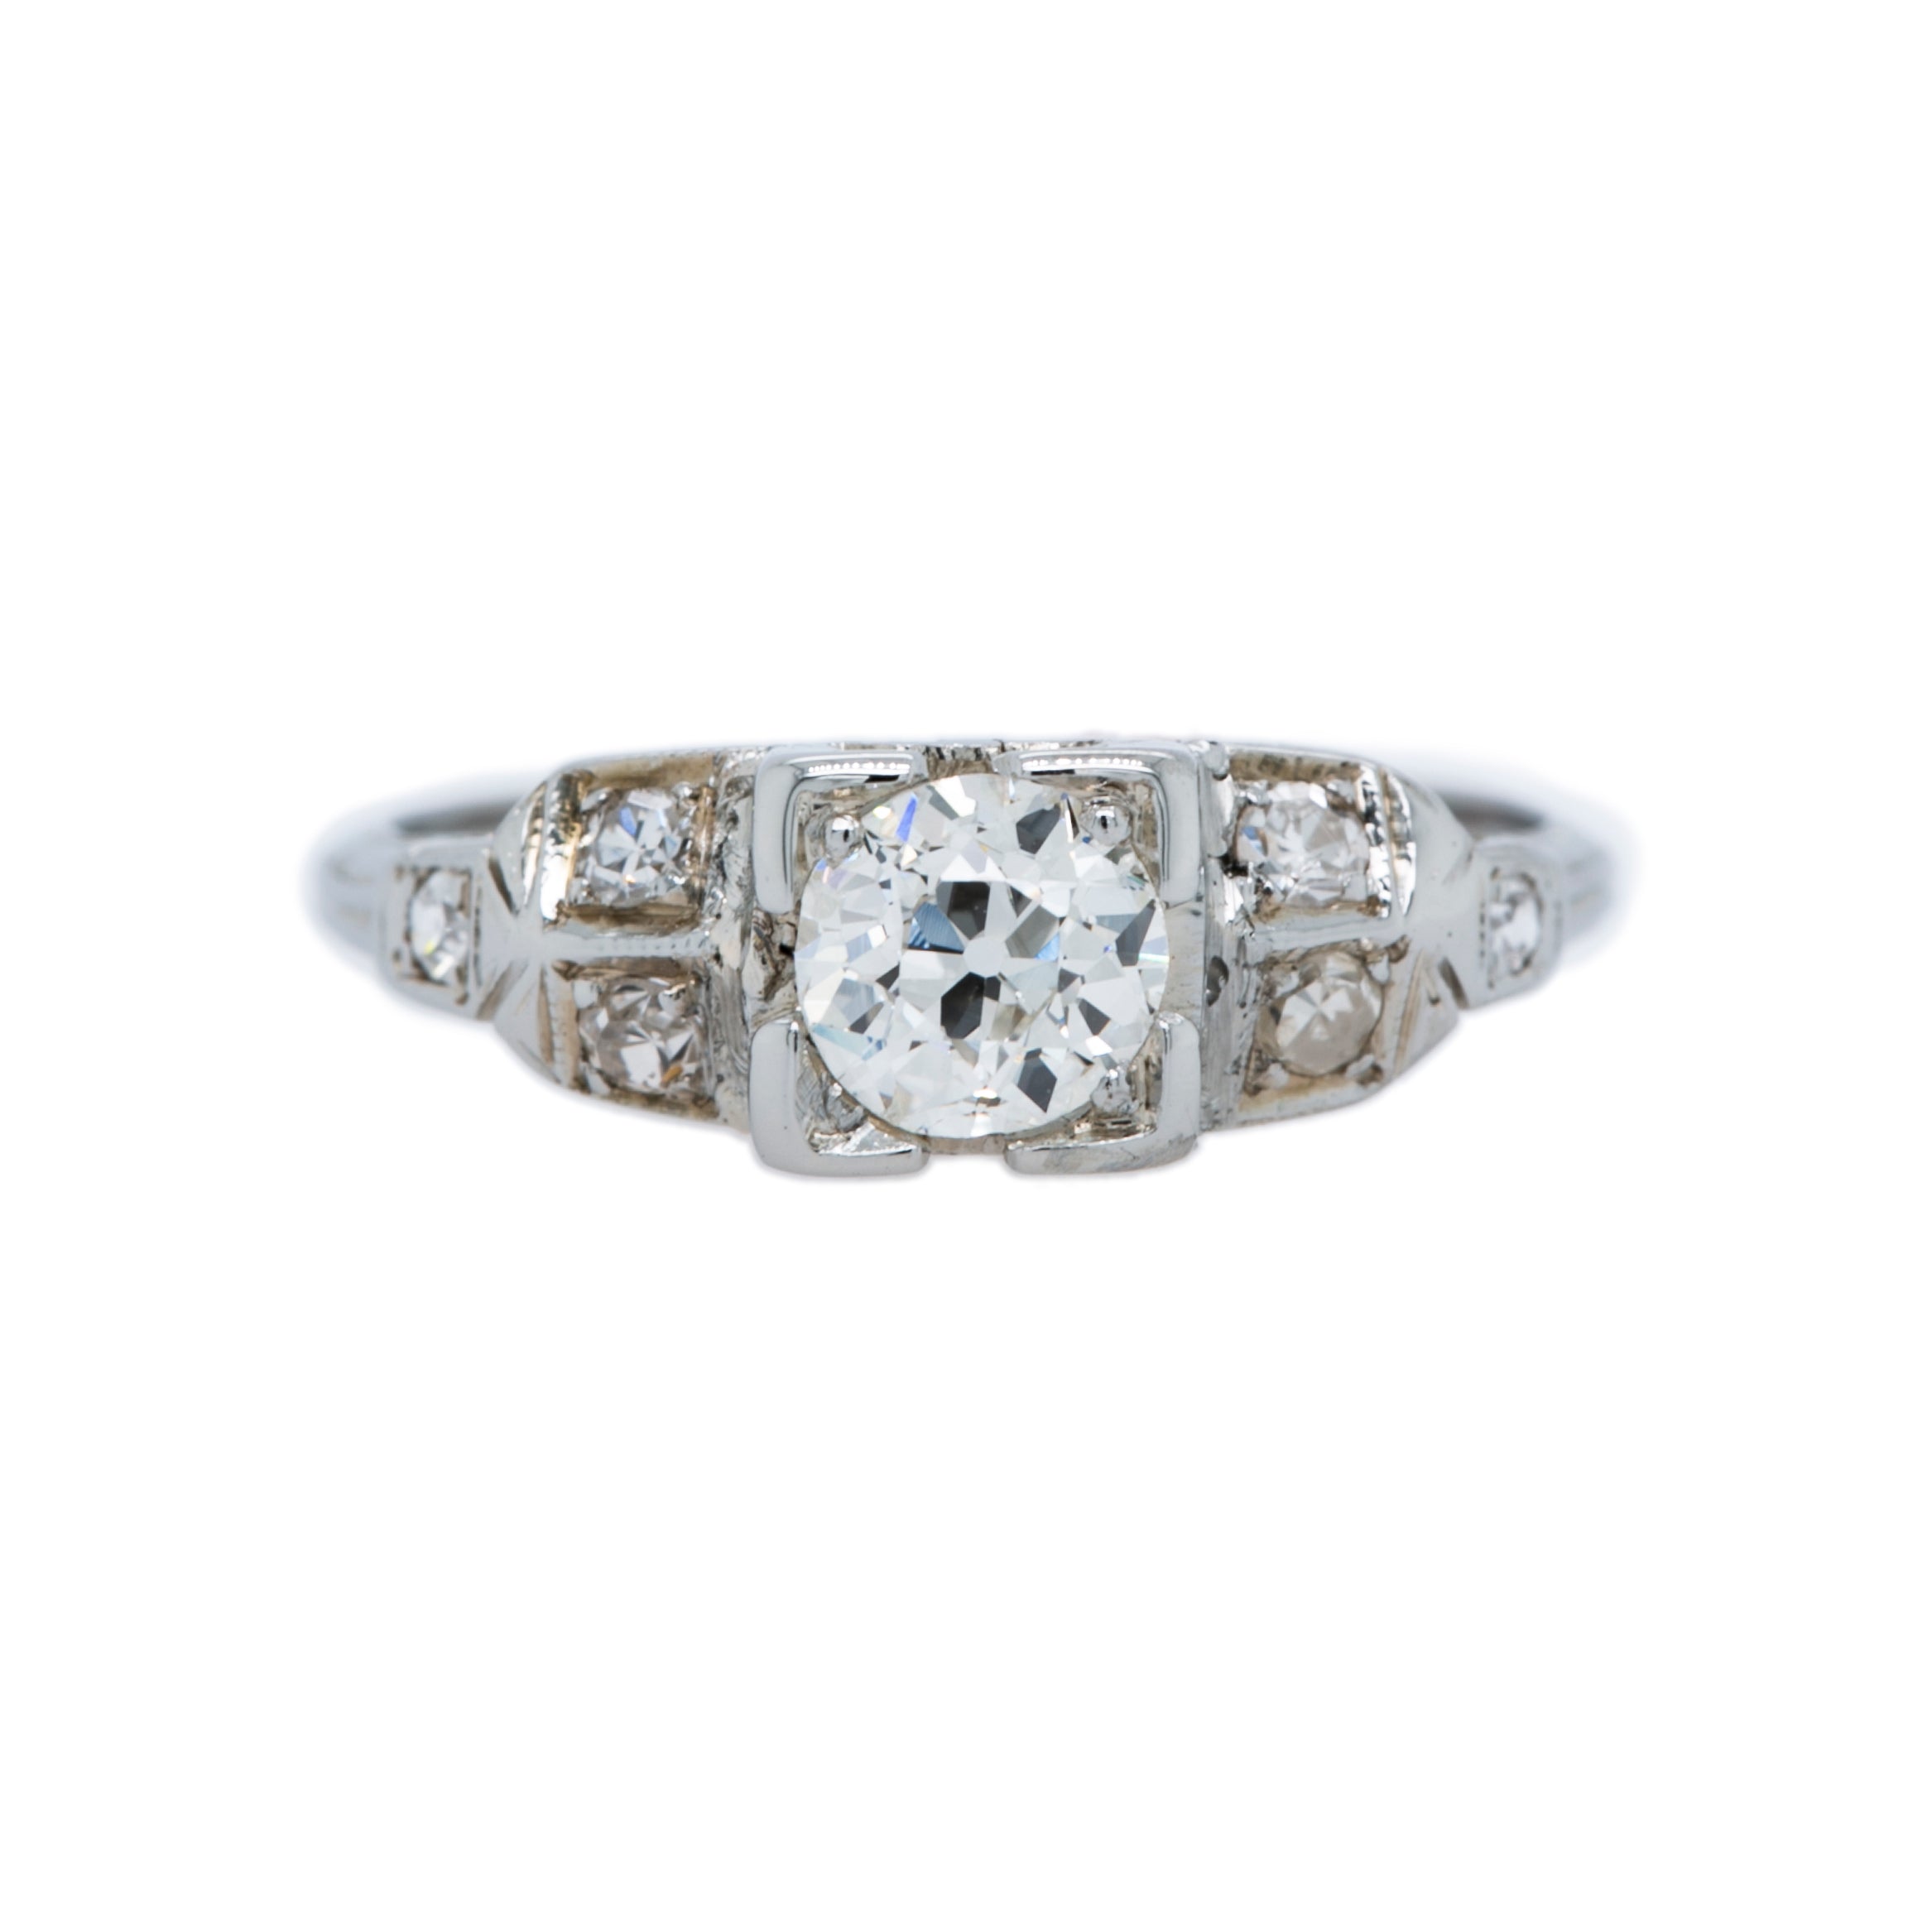 A Lovely Art Deco 18K White Gold and Diamond Engagement Ring | Grandy